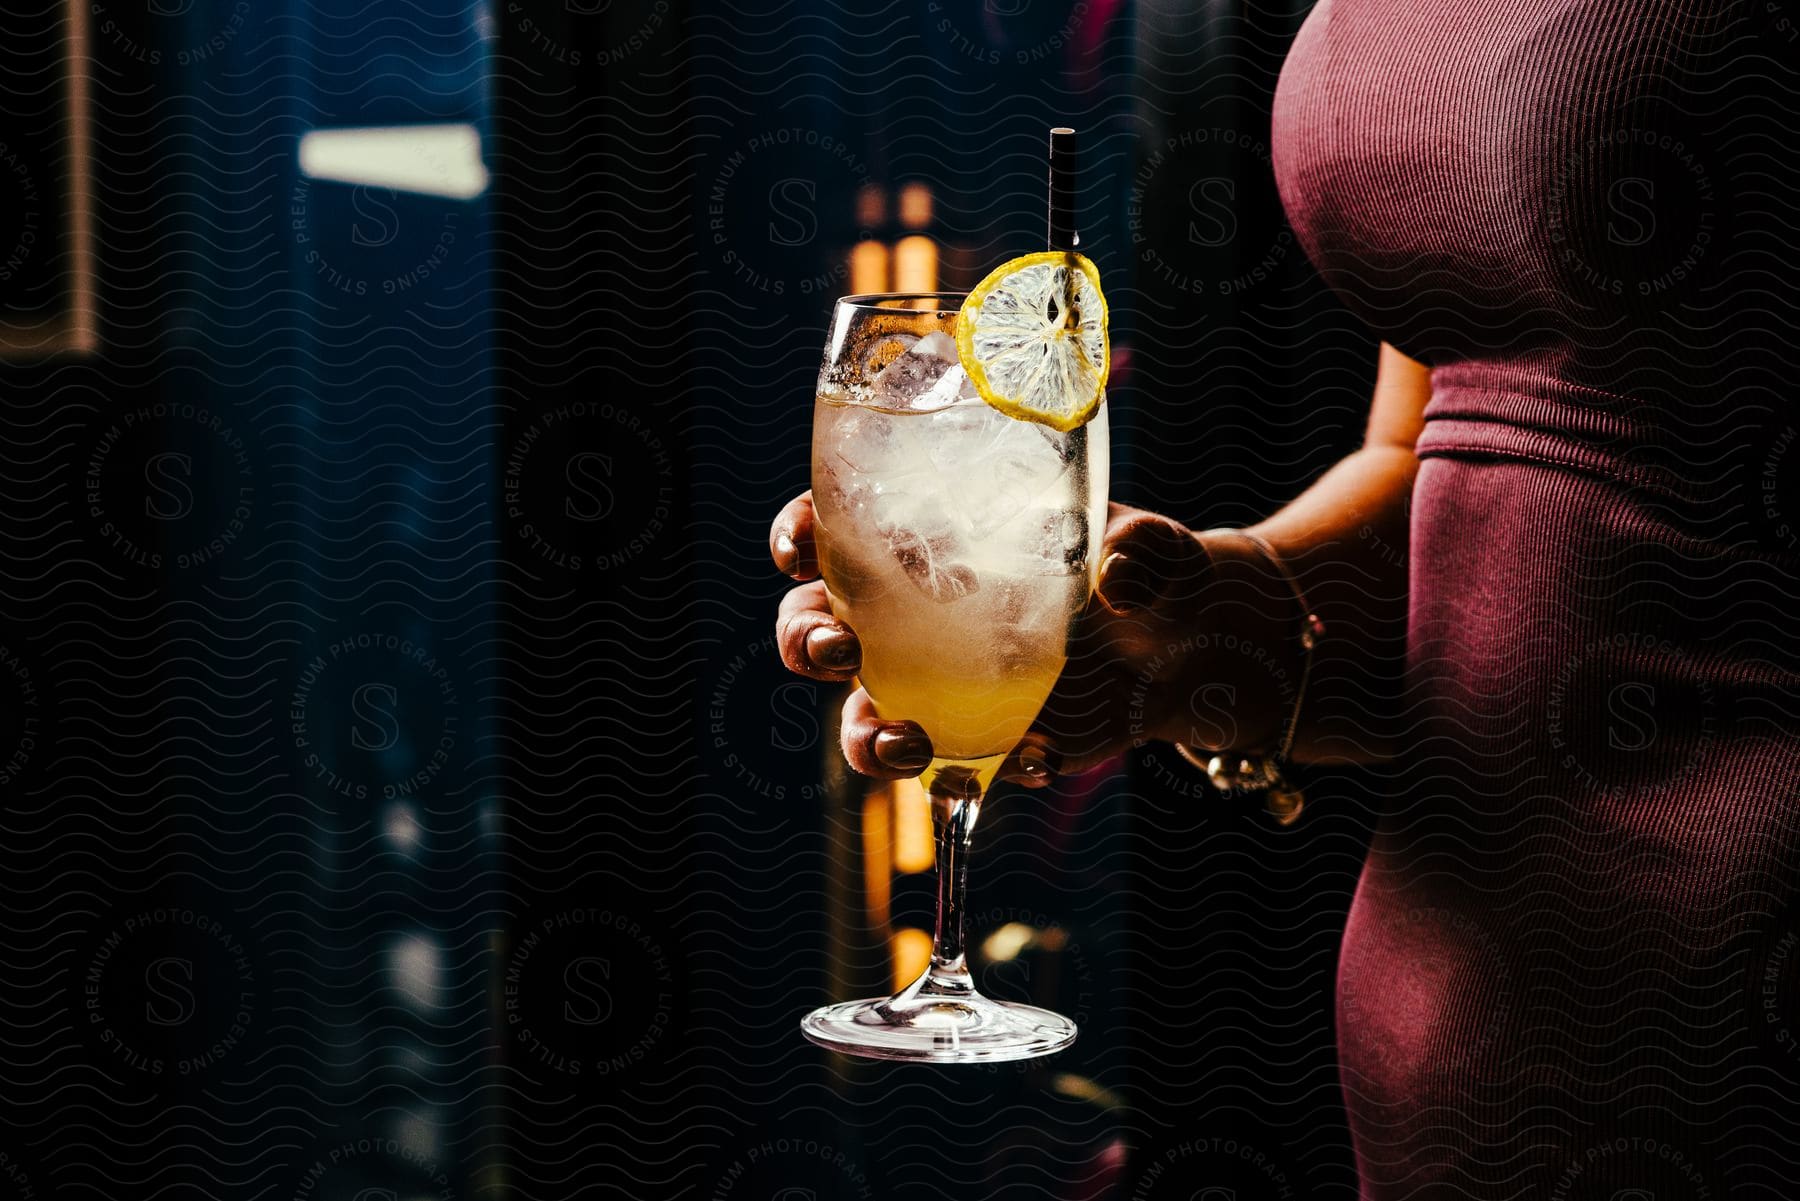 The hand holds a refreshing cocktail with a slice of lemon as a garnish.